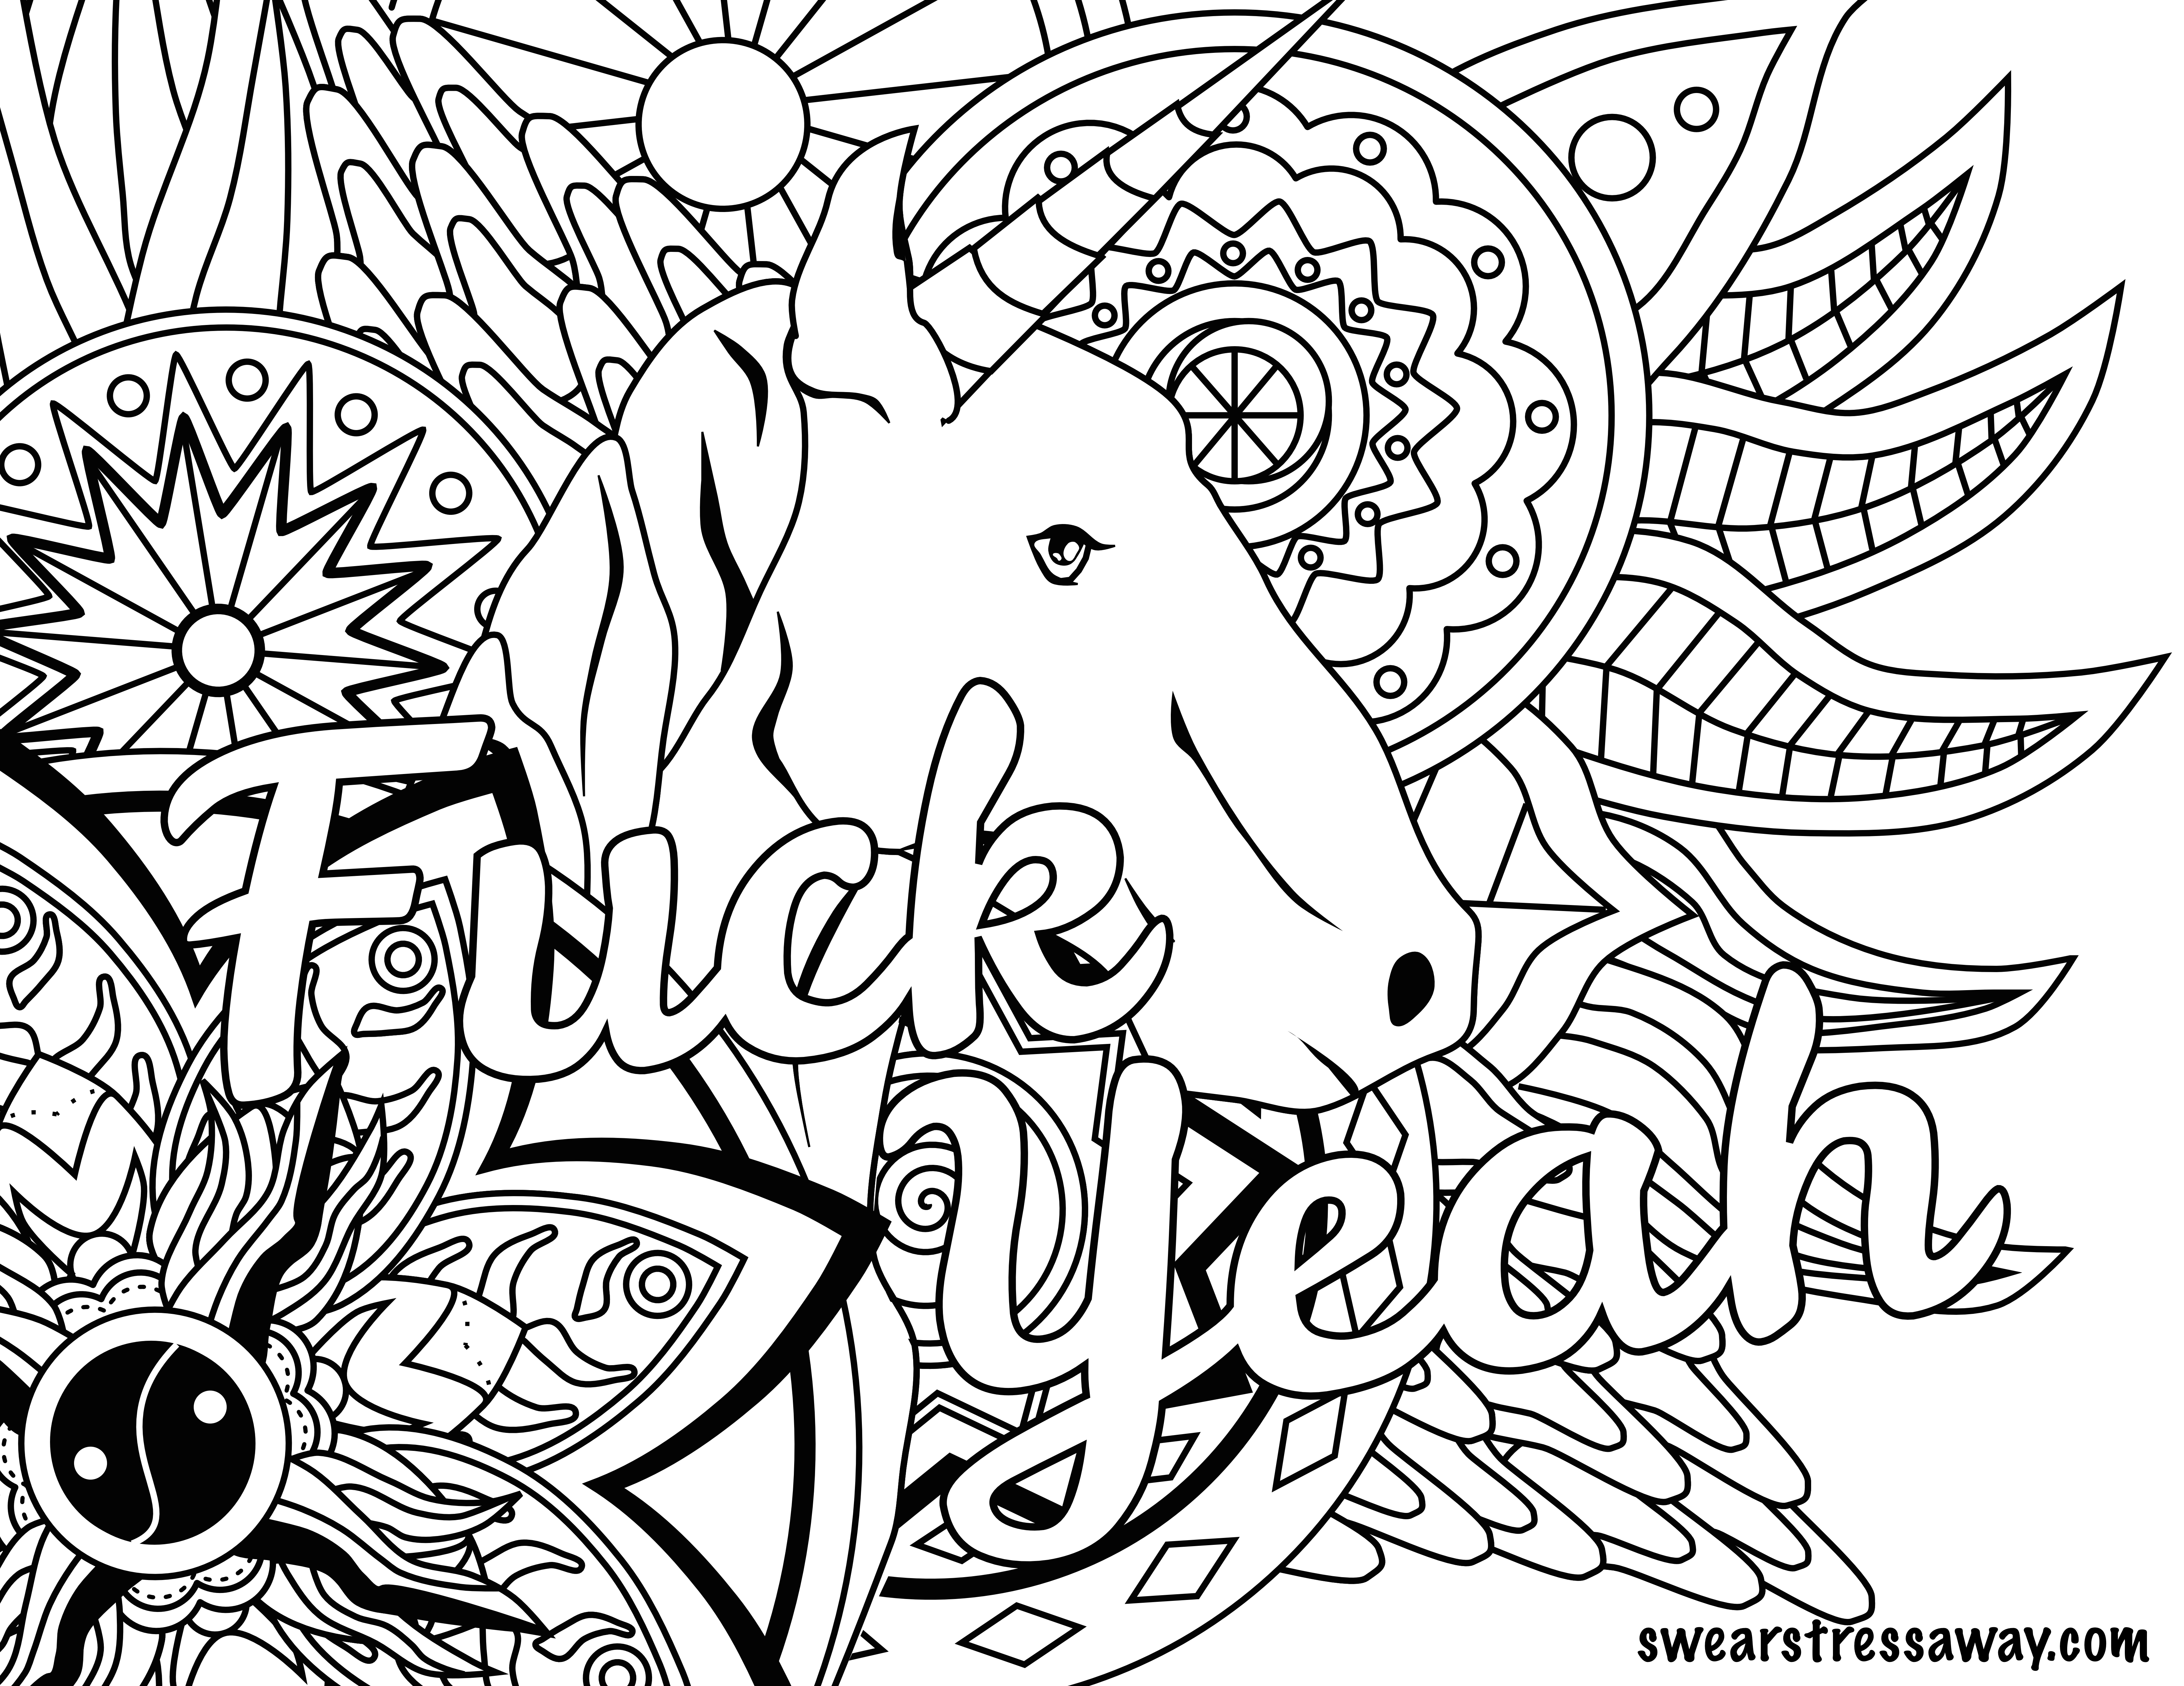 420 Coloring Pages at GetColorings.com | Free printable colorings pages